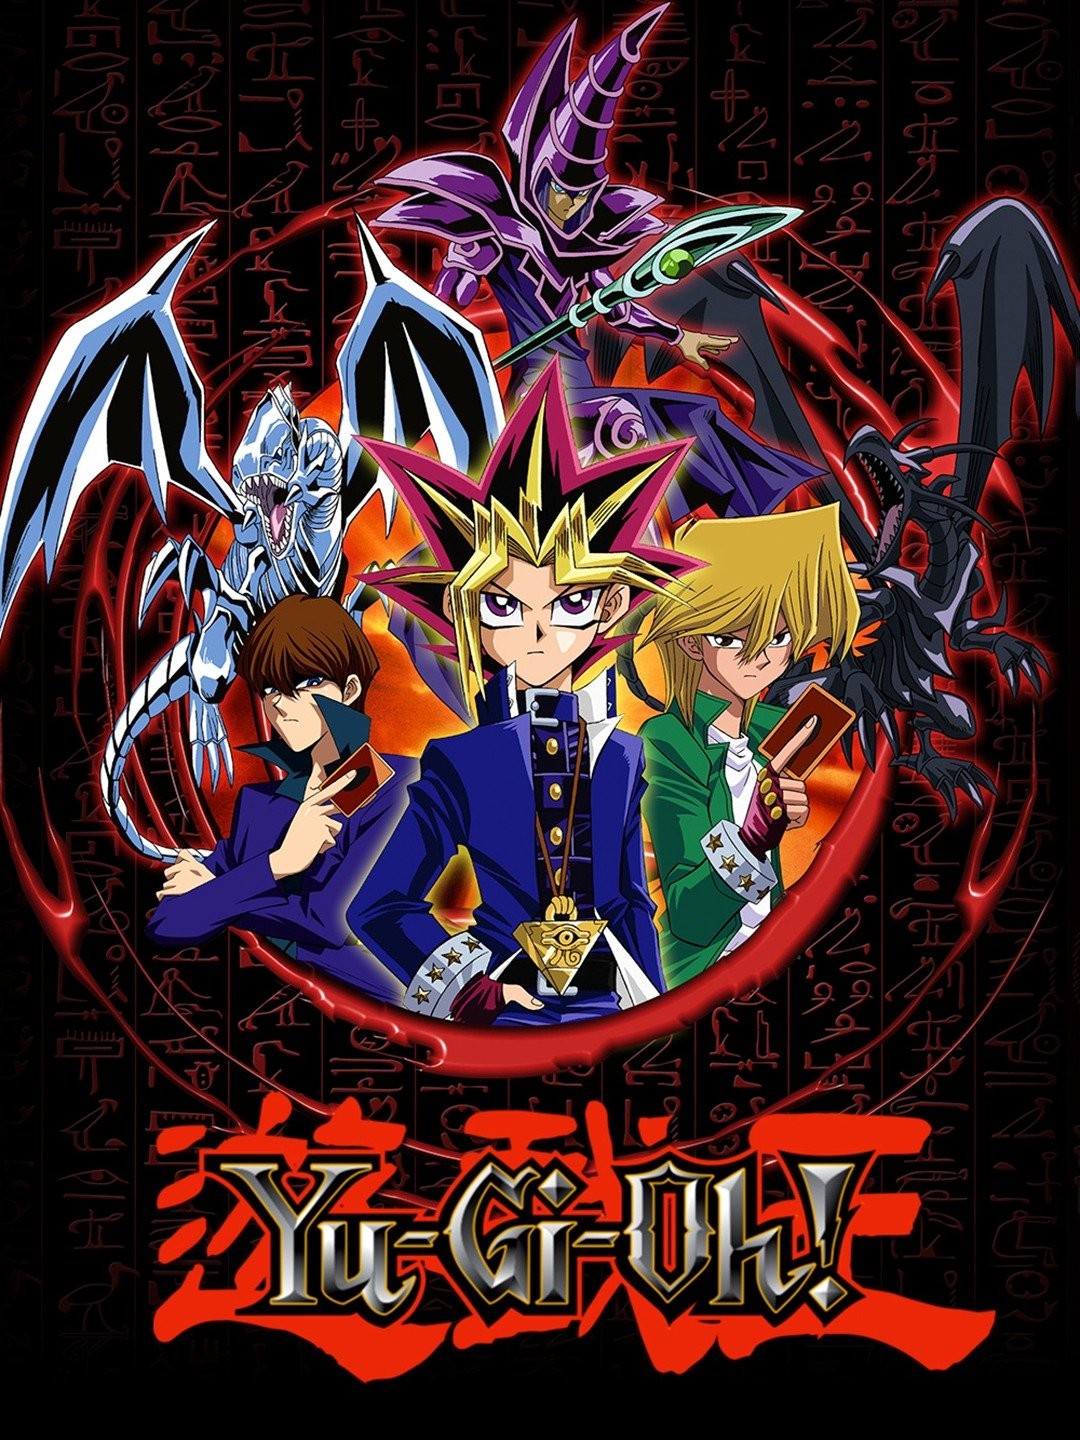 How Much Do You Know About Yugioh Season 1 - ProProfs Quiz